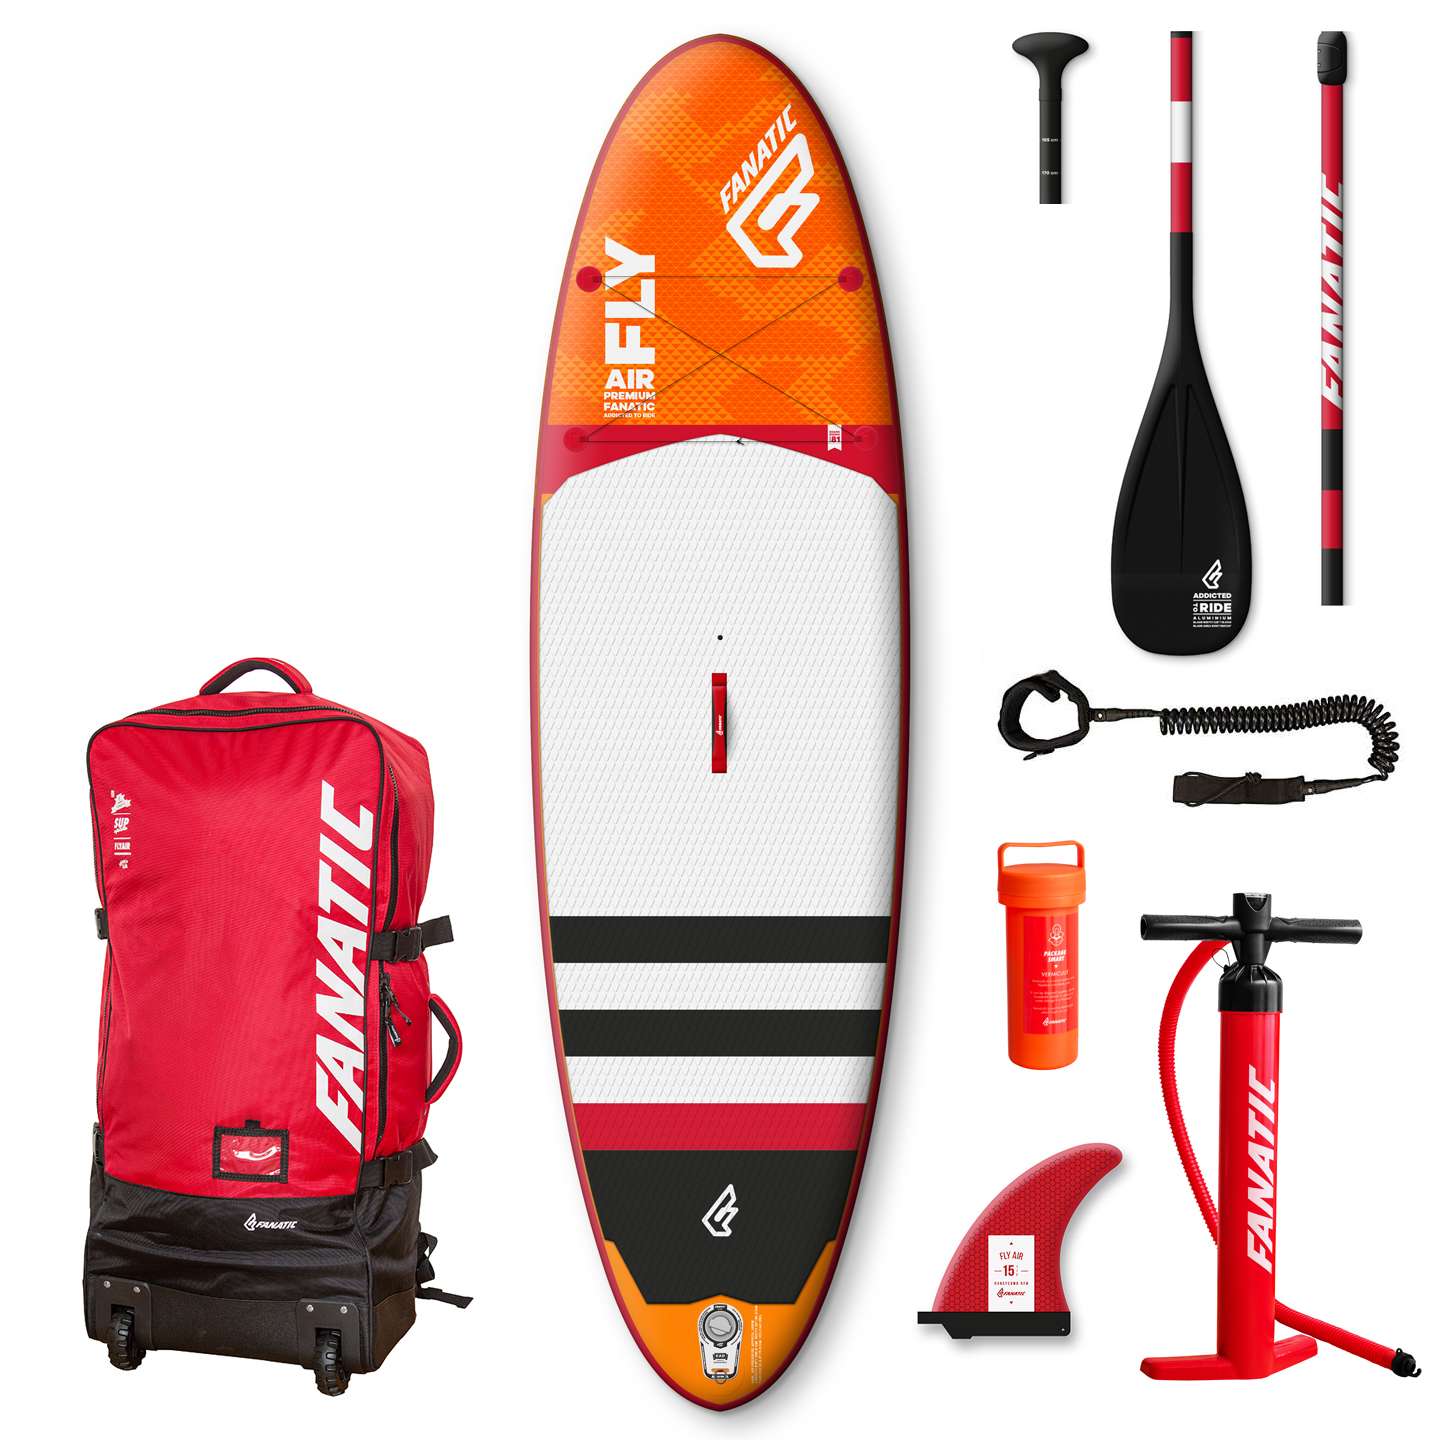 Fanatic Fly Air Premium 2017 10'4 Inflatable SUP | King of Watersports